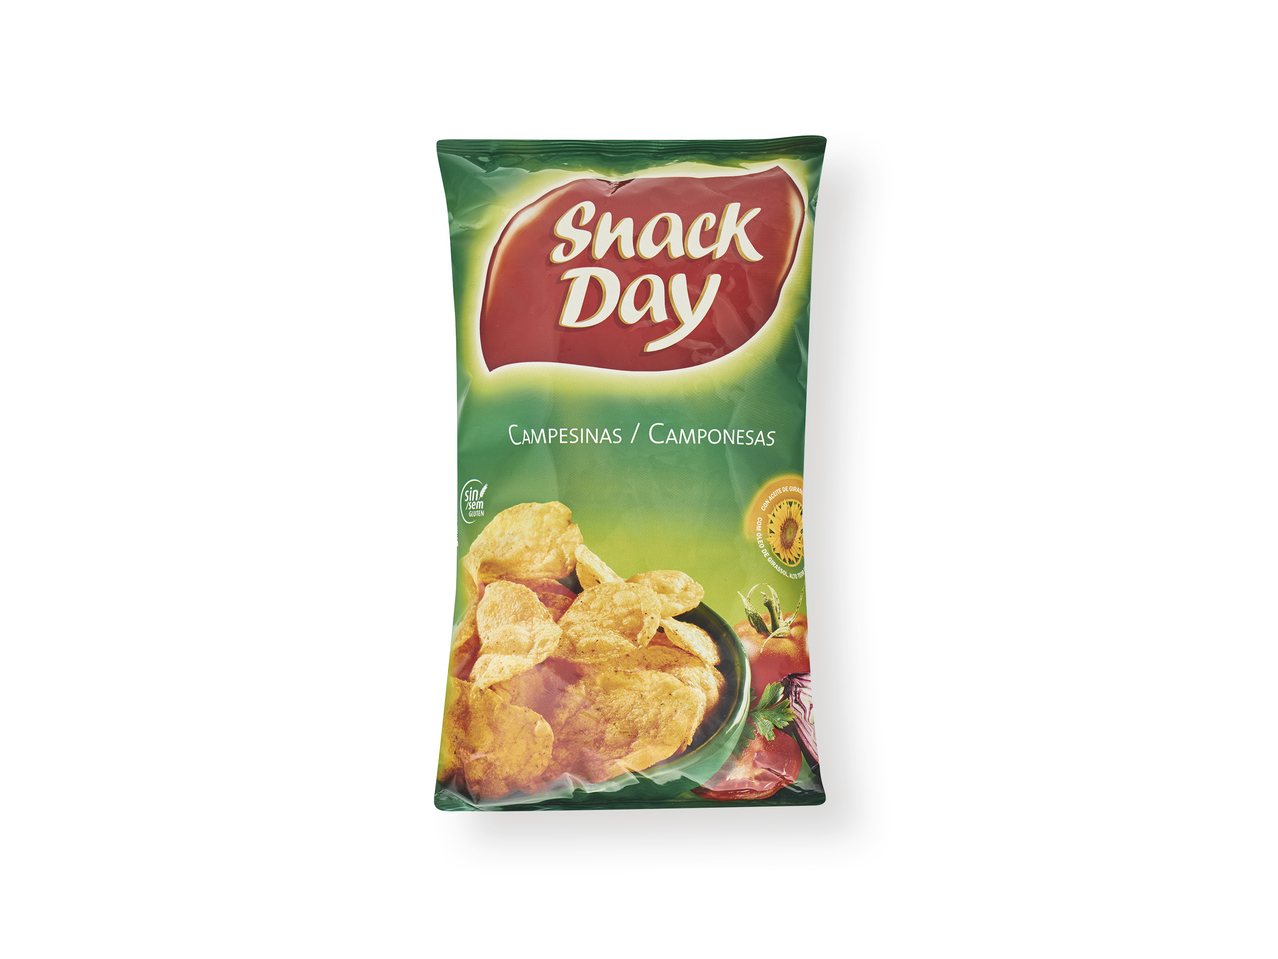 'Snack day(R)' Patatas